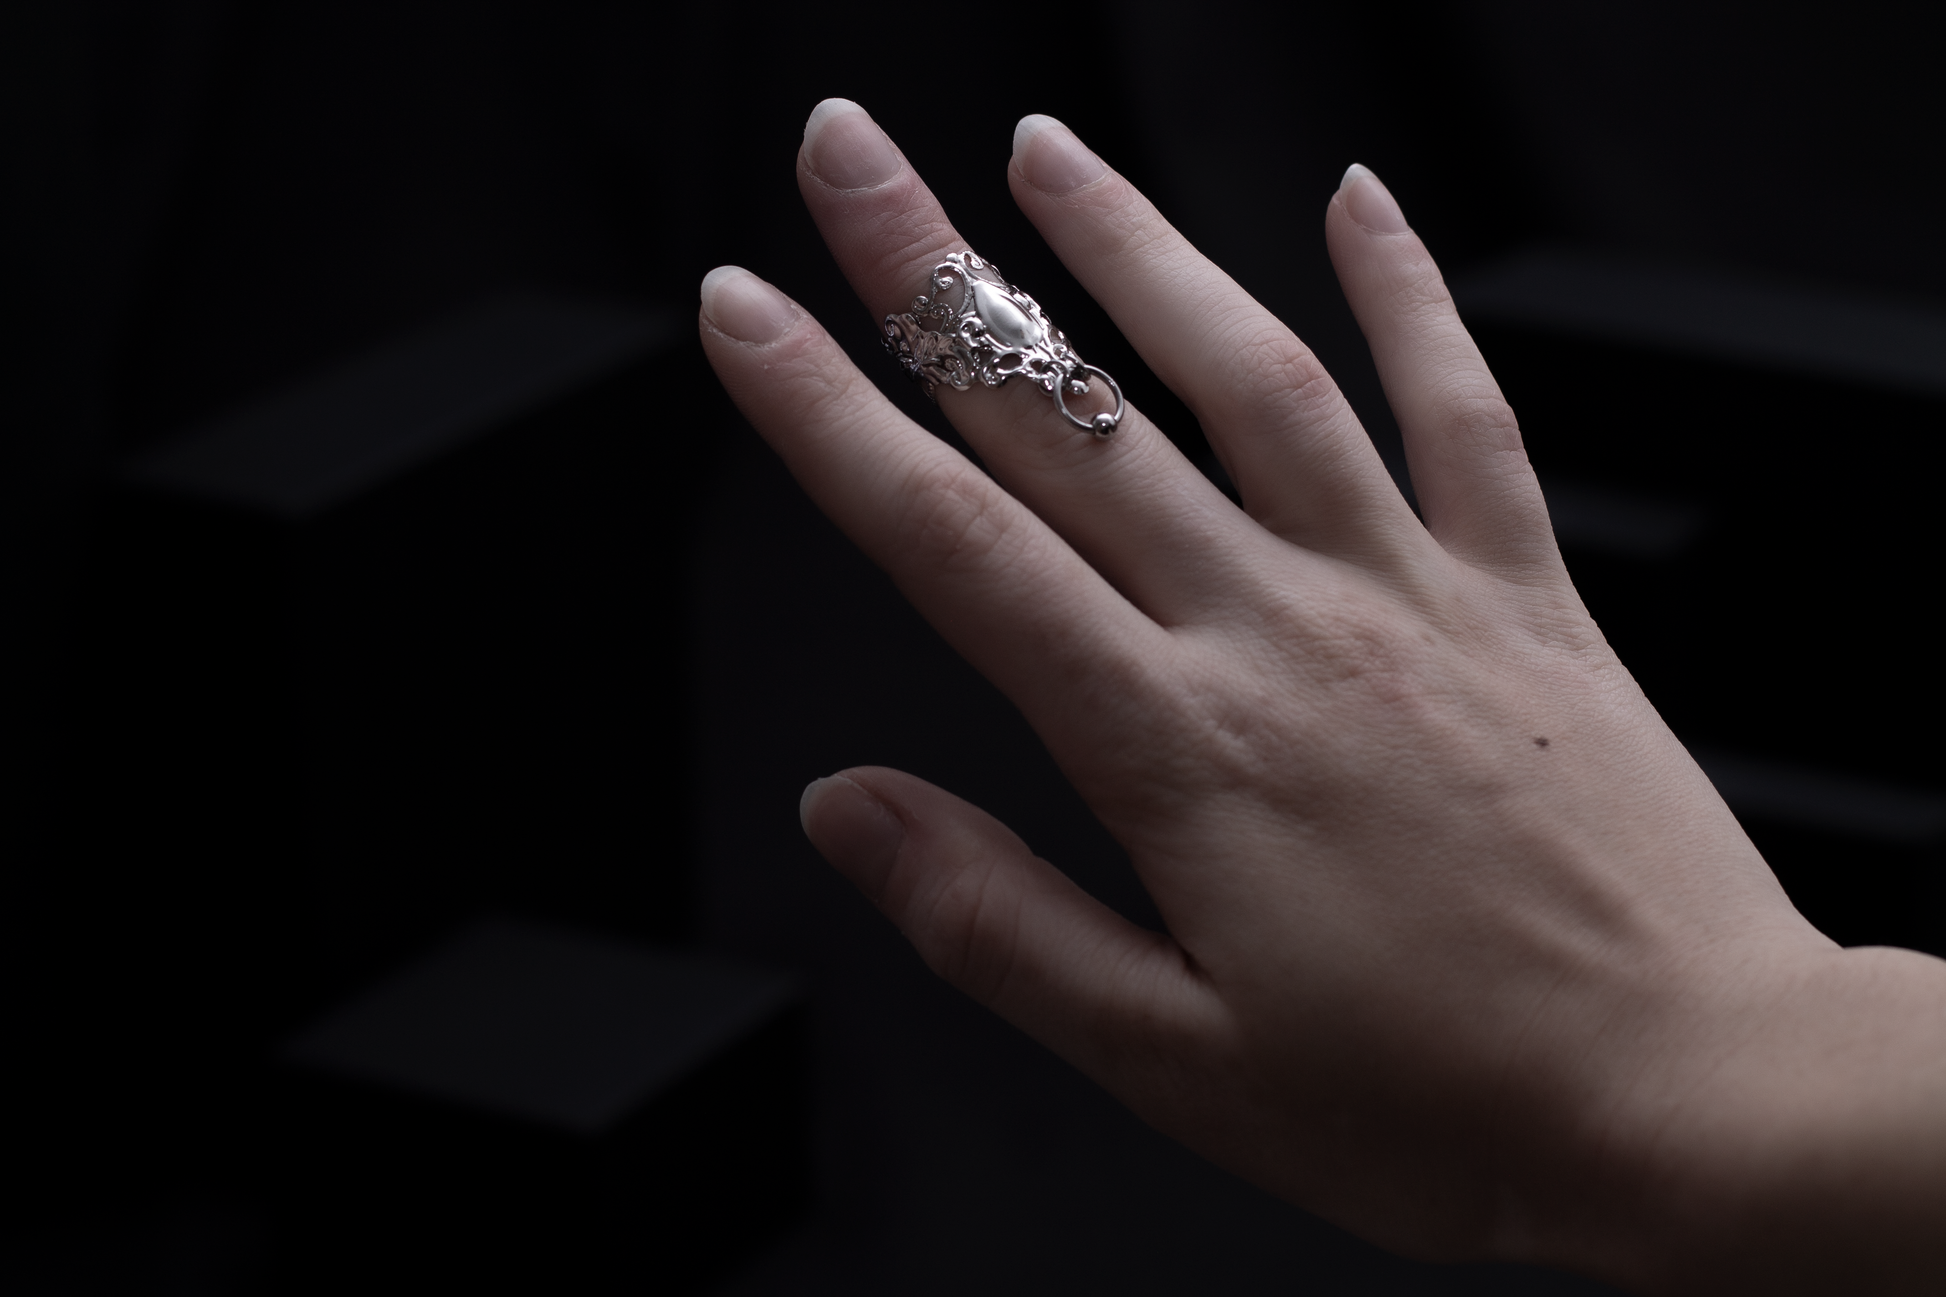 Myril Jewels presents a sophisticated midi ring, embodying neo-gothic charm with its delicate filigree and bold design. This piece, perfect for gothic-chic and whimsigoth enthusiasts, adds an enigmatic touch to everyday wear and is an ideal goth girlfriend gift or a unique find for festival jewelry collectors.